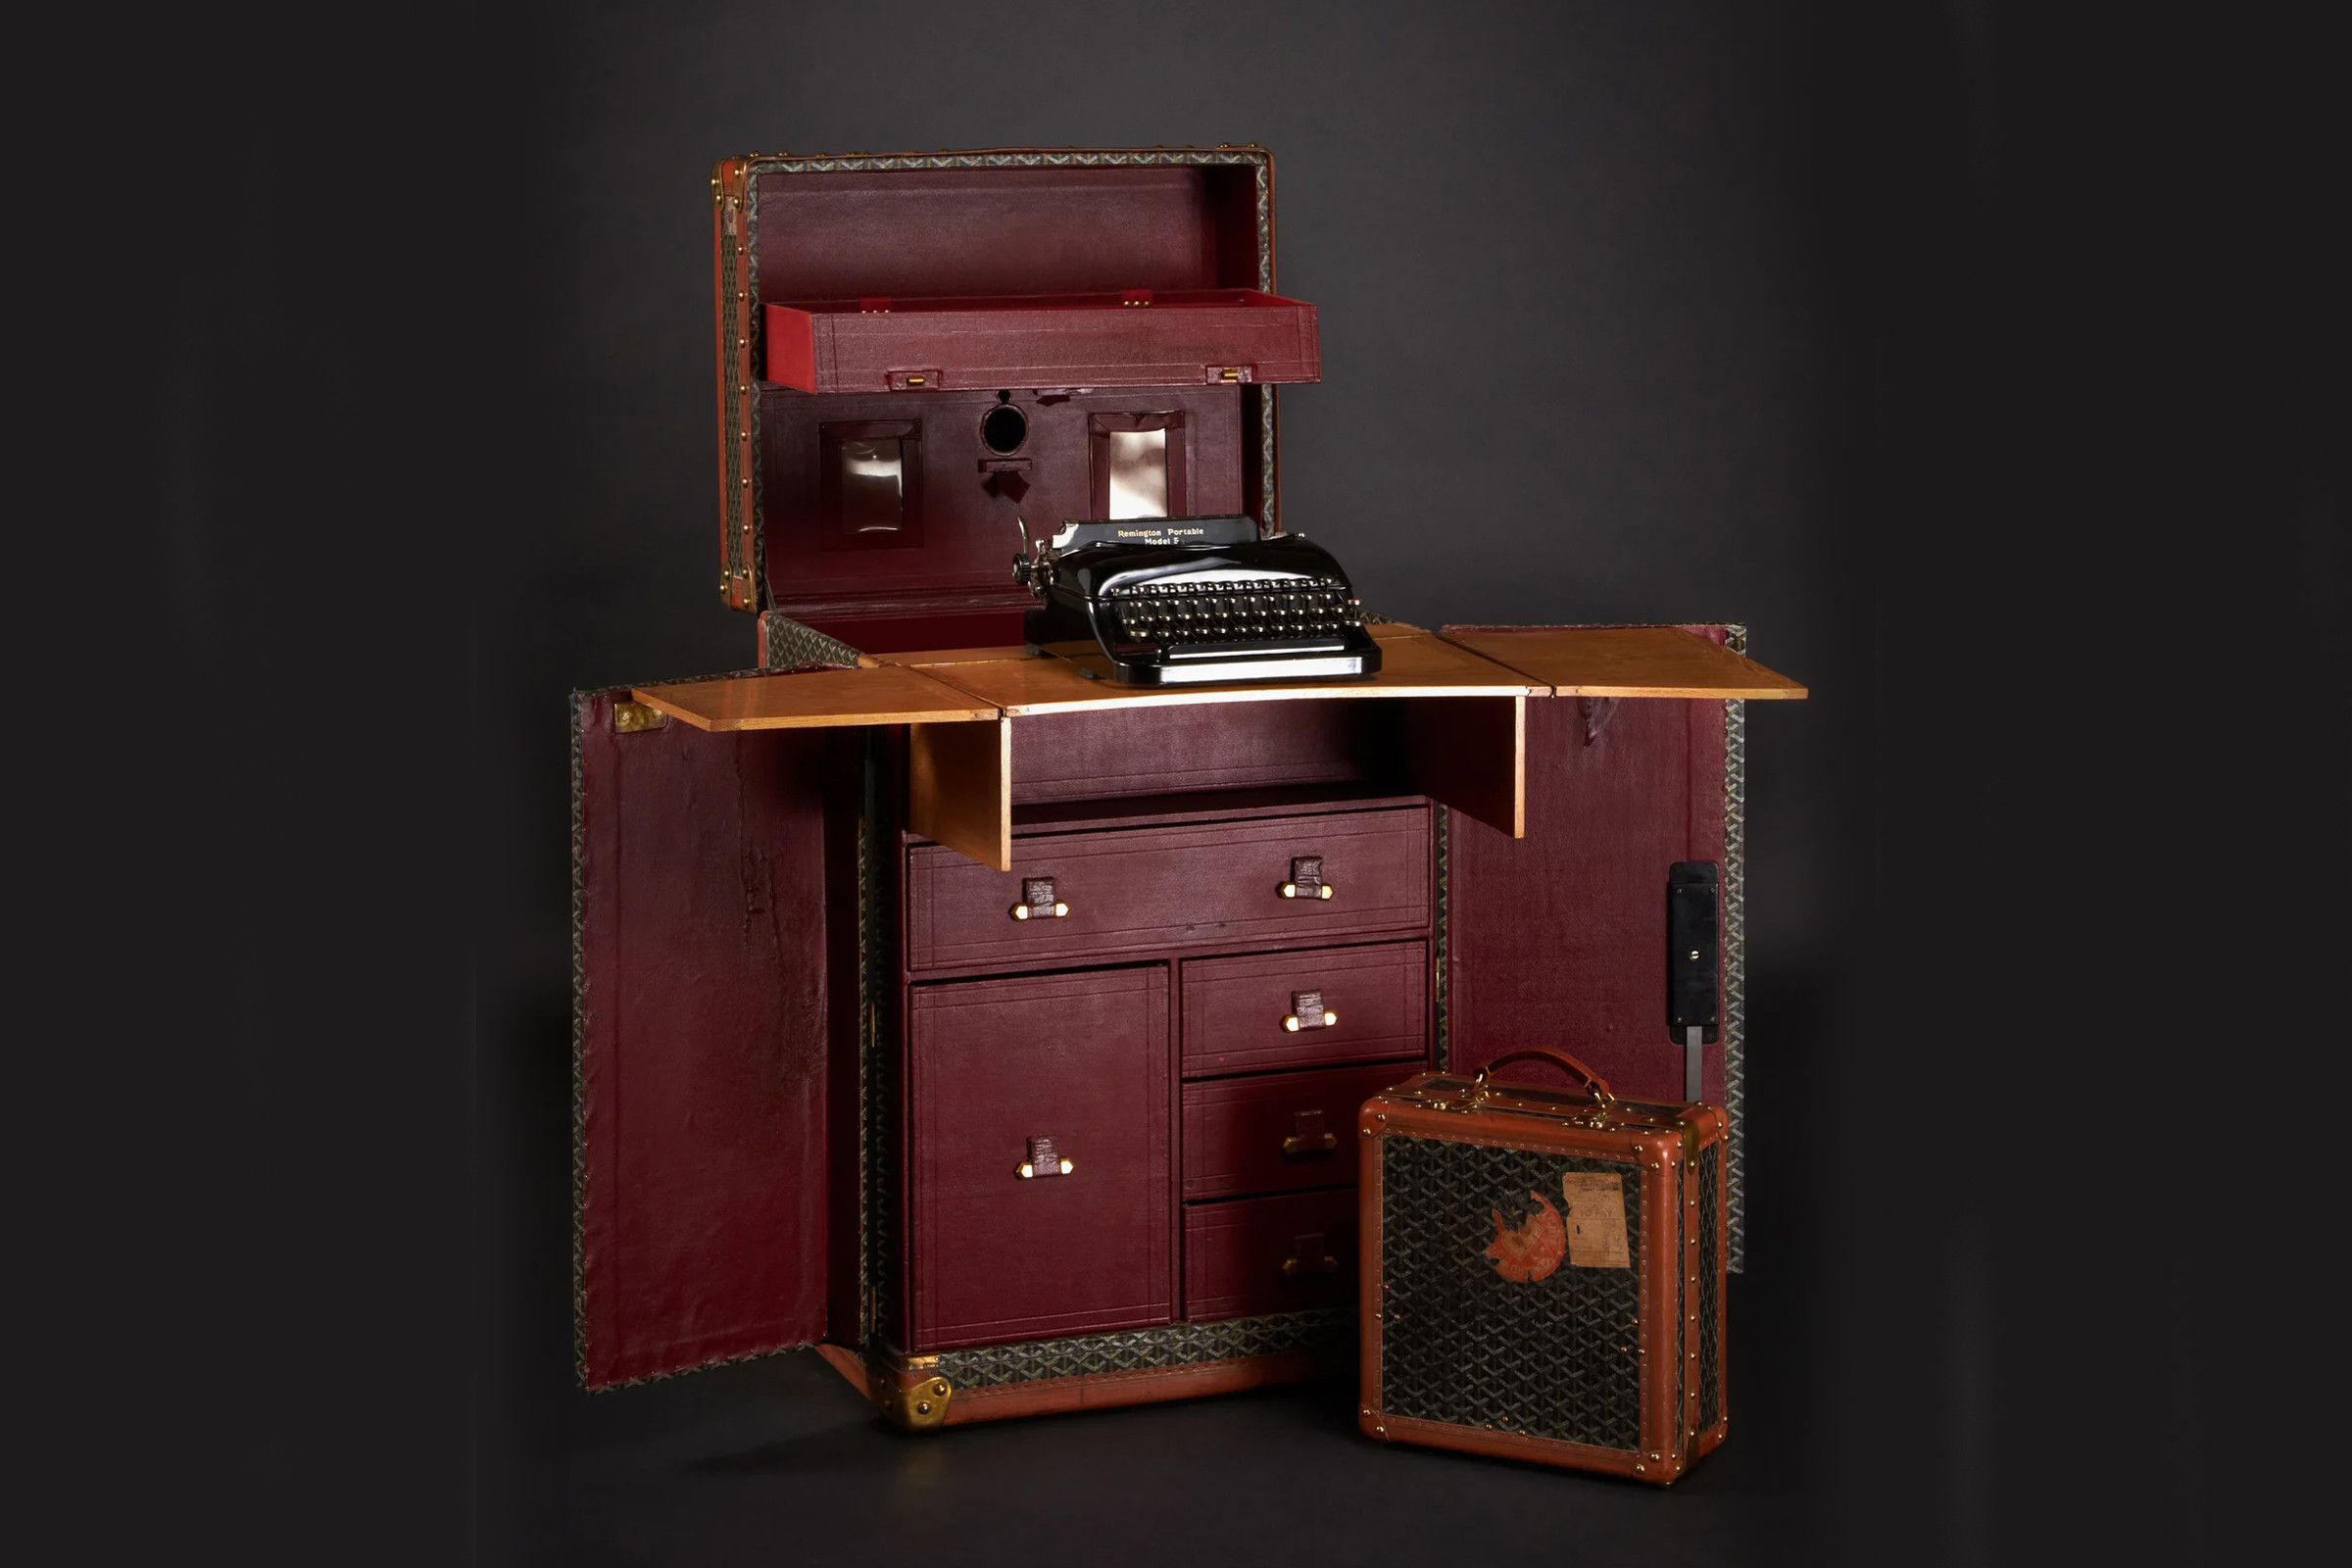 Sir Arthur Conan Doyle's custom Goyard trunk, which expands from a standard travel trunk into a full-size desk